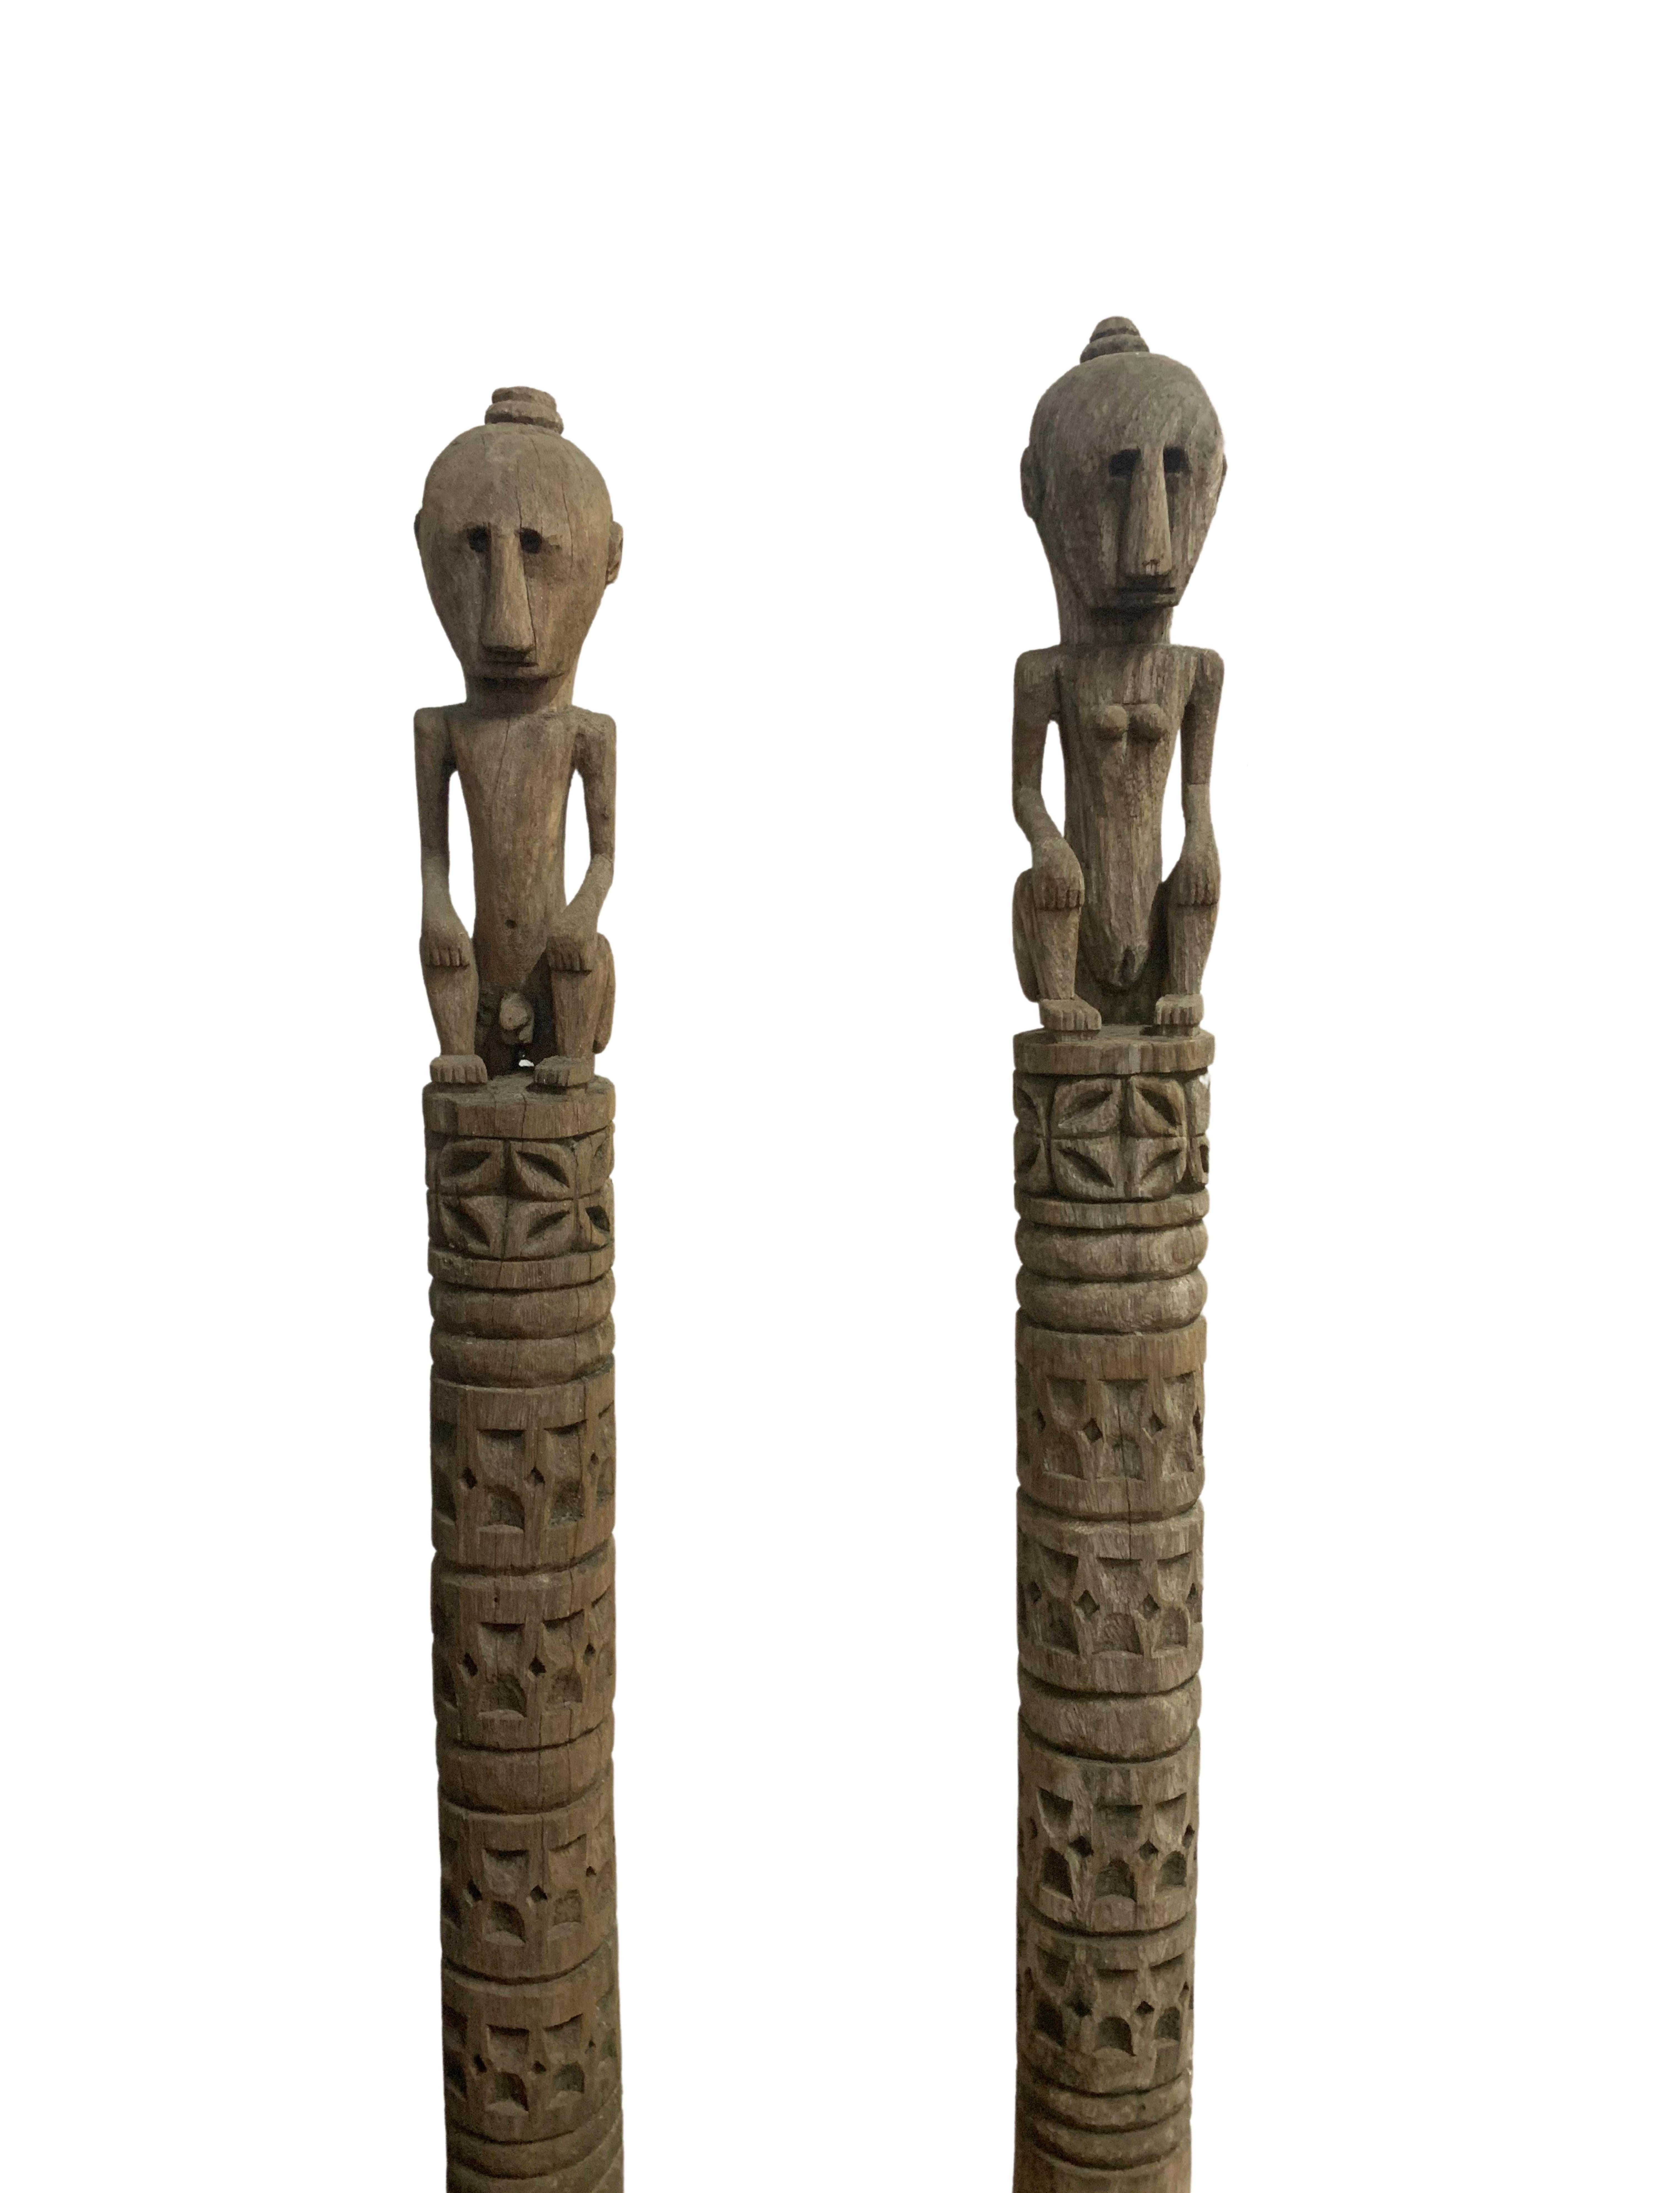 This pair of wooden sculpture of ancestral figures originate from the Island of Timor in Indonesia. They feature tribal engravings and feature a male and female figure. Carved from a single block of wood the sculptures are mounted on a black iron